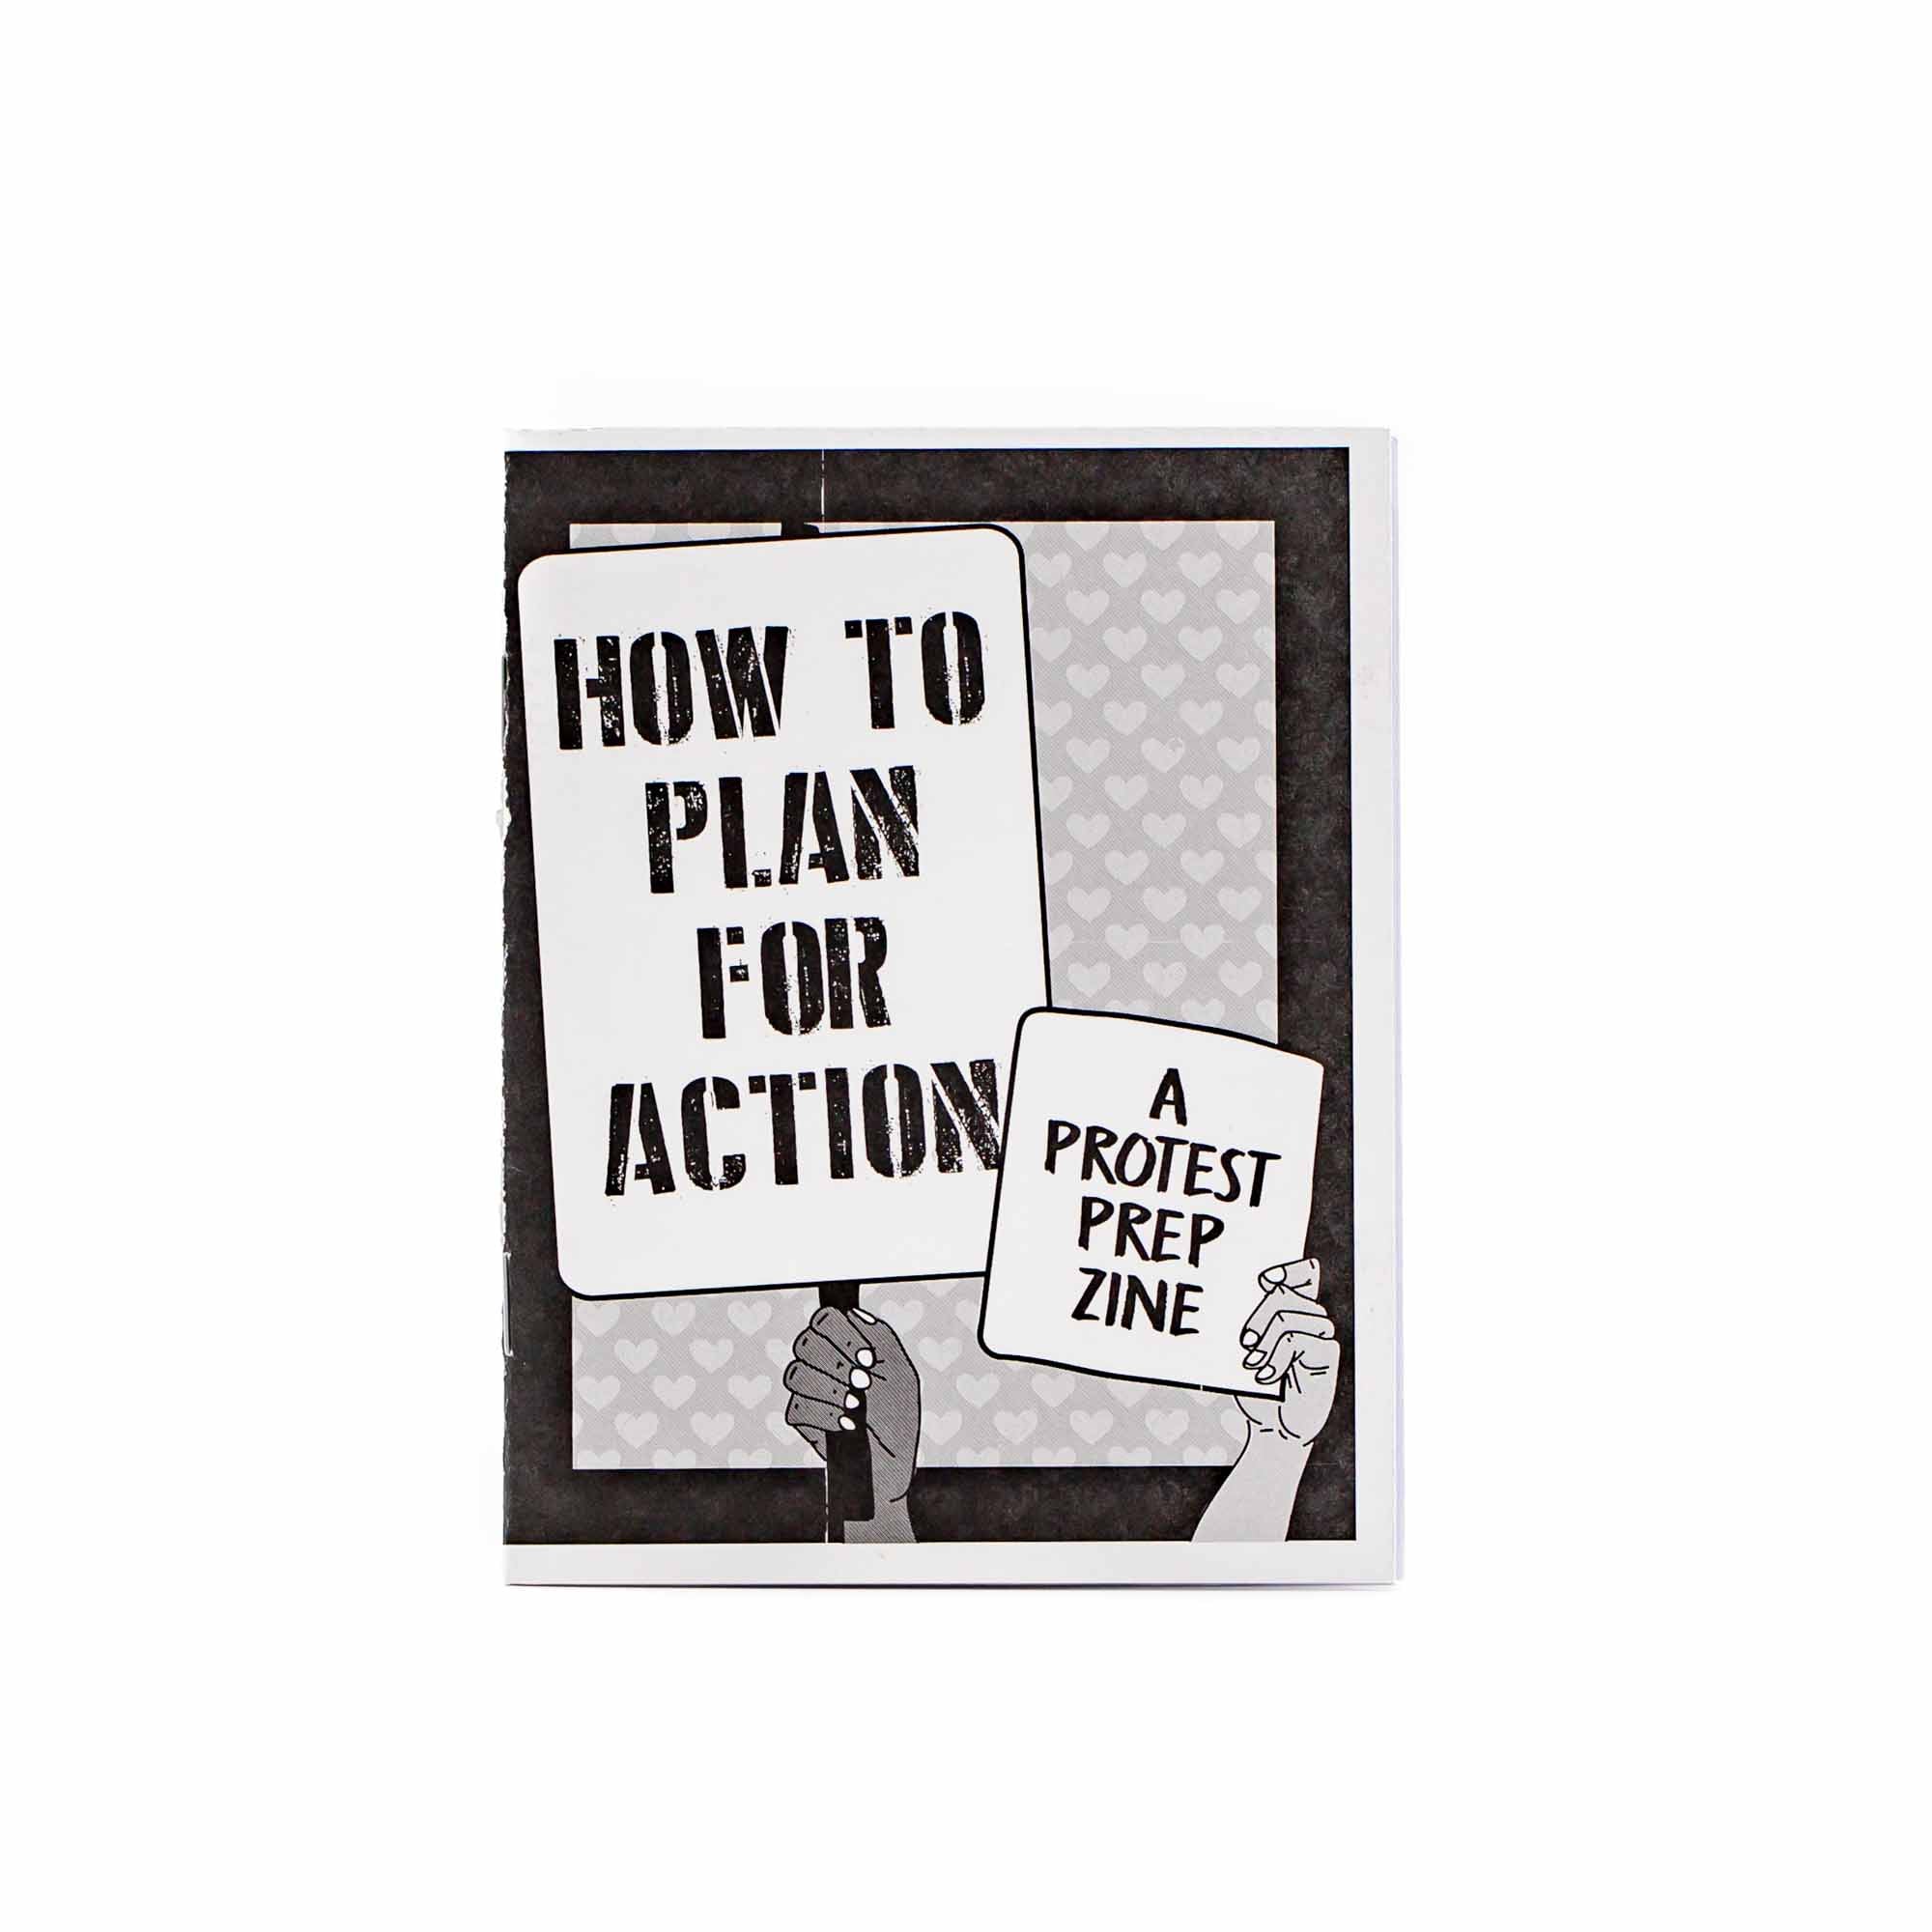 How to Plan for Action: A Protest Prep Zine - Mortise And Tenon